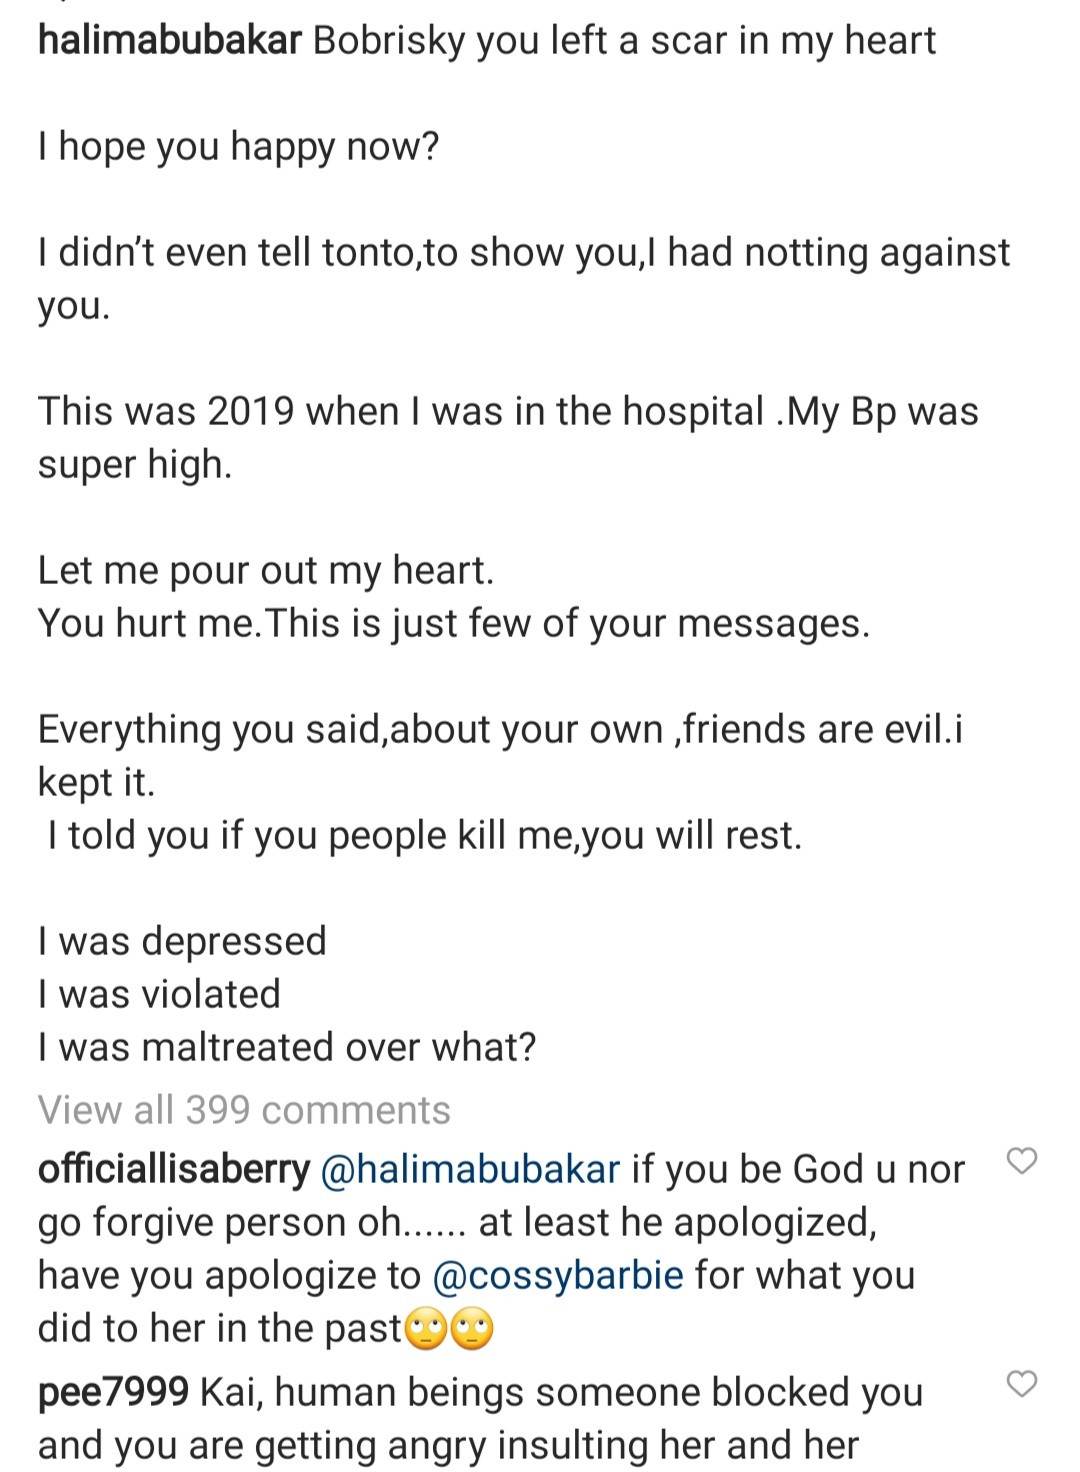 actress halima abubakar starts spilling shares heated chats between herself and bobrisky as she accuses the crossdresser of leaving a scar in her heart 7